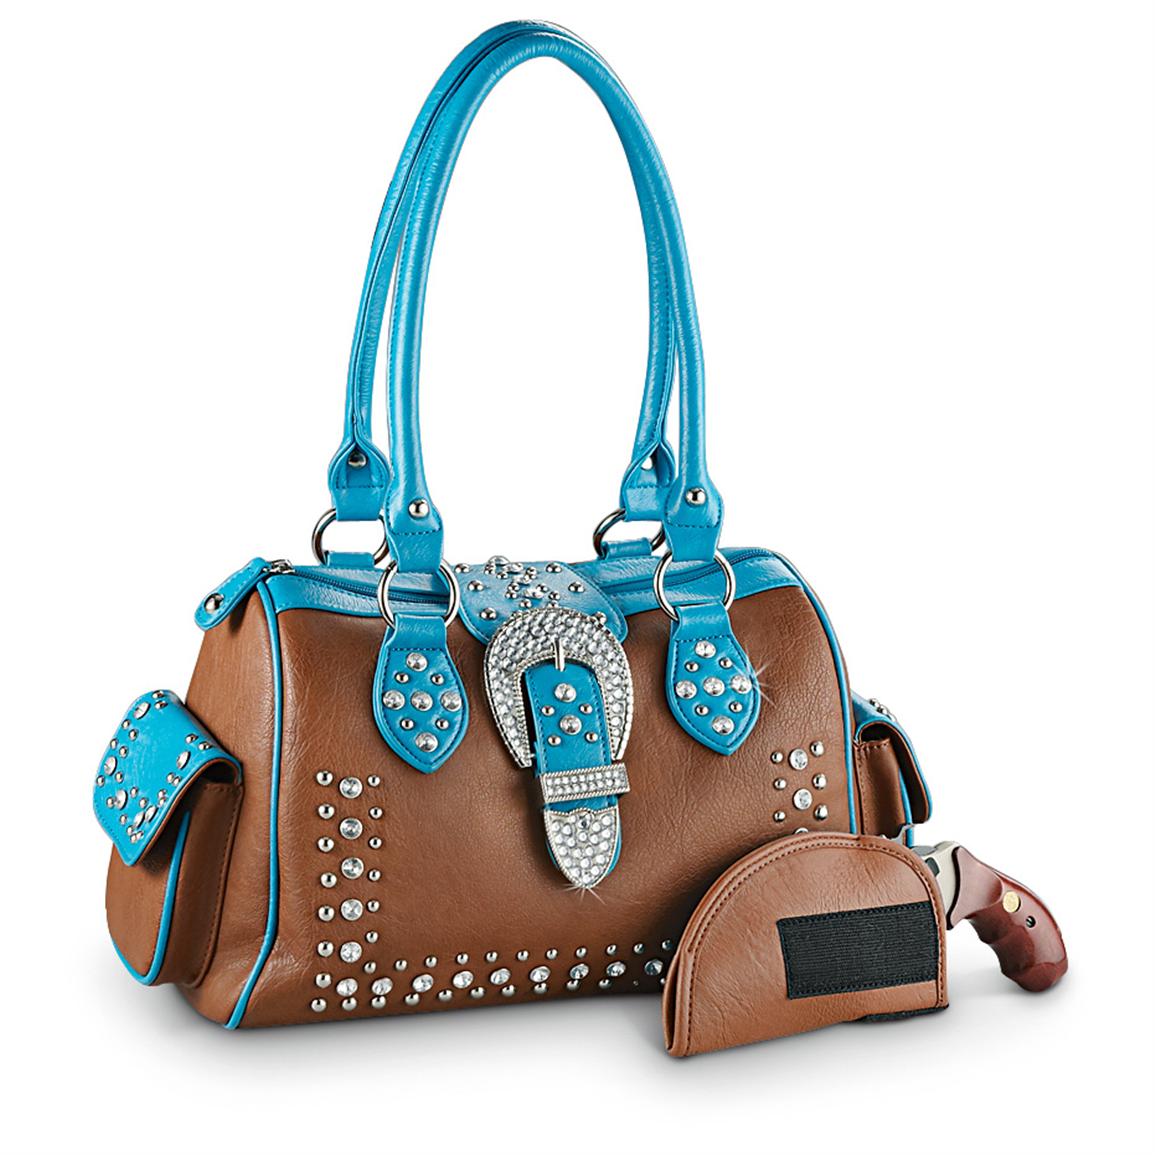 Western Concealment Purse with Bling - 584423, Purses & Handbags at Sportsman&#39;s Guide